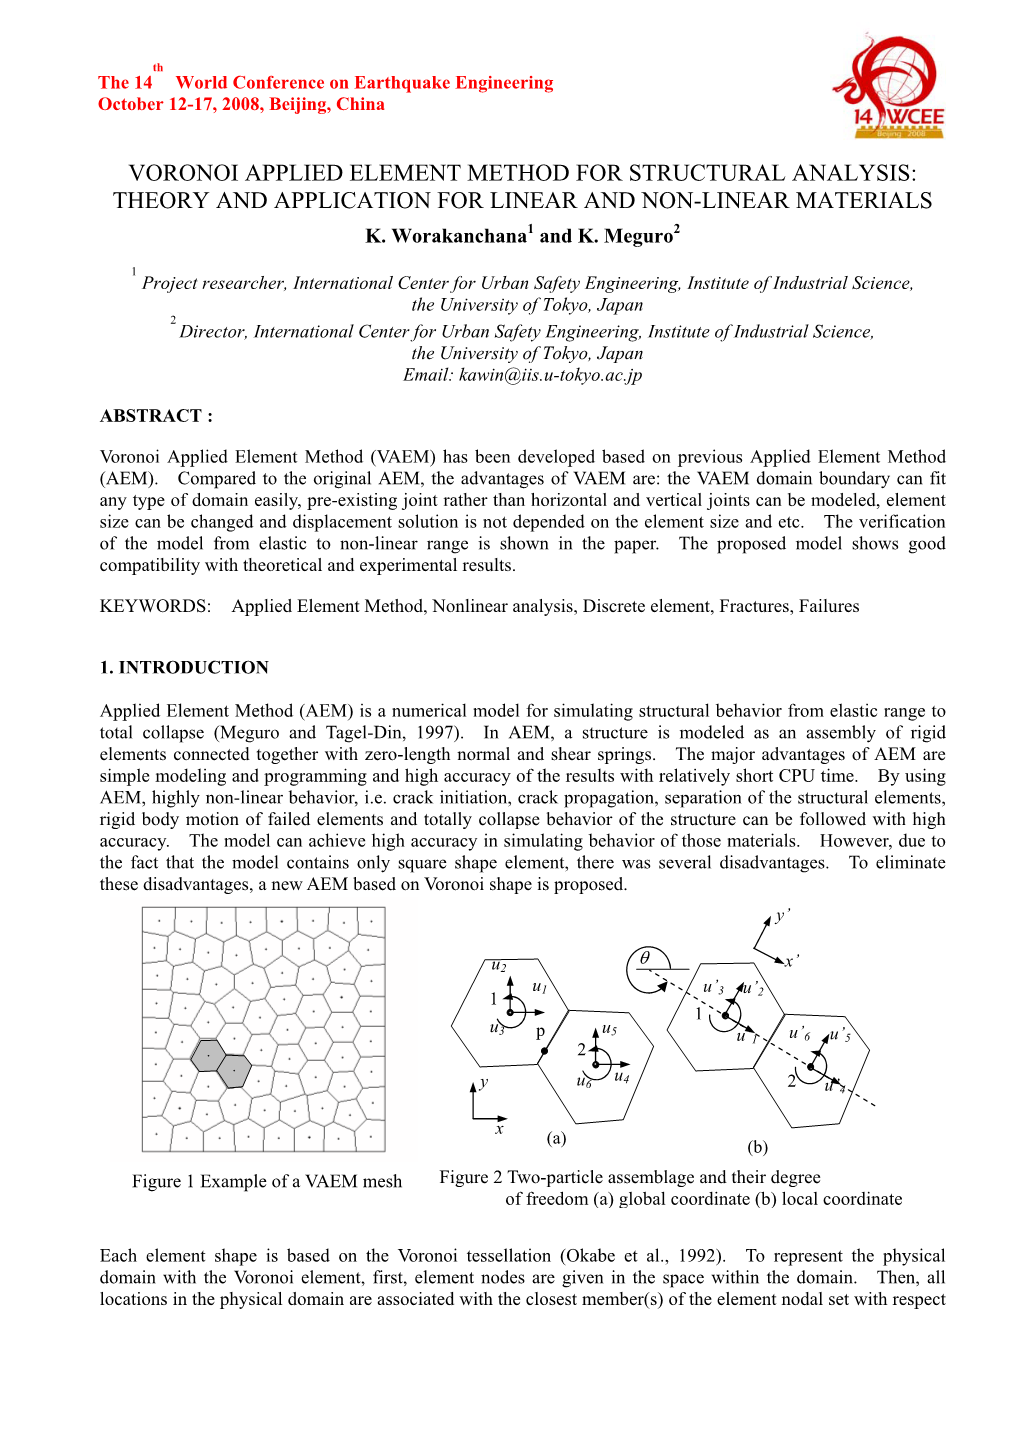 Voronoi Applied Element Method for Structural Analysis: Theory and Application for Linear and Non-Linear Materials K